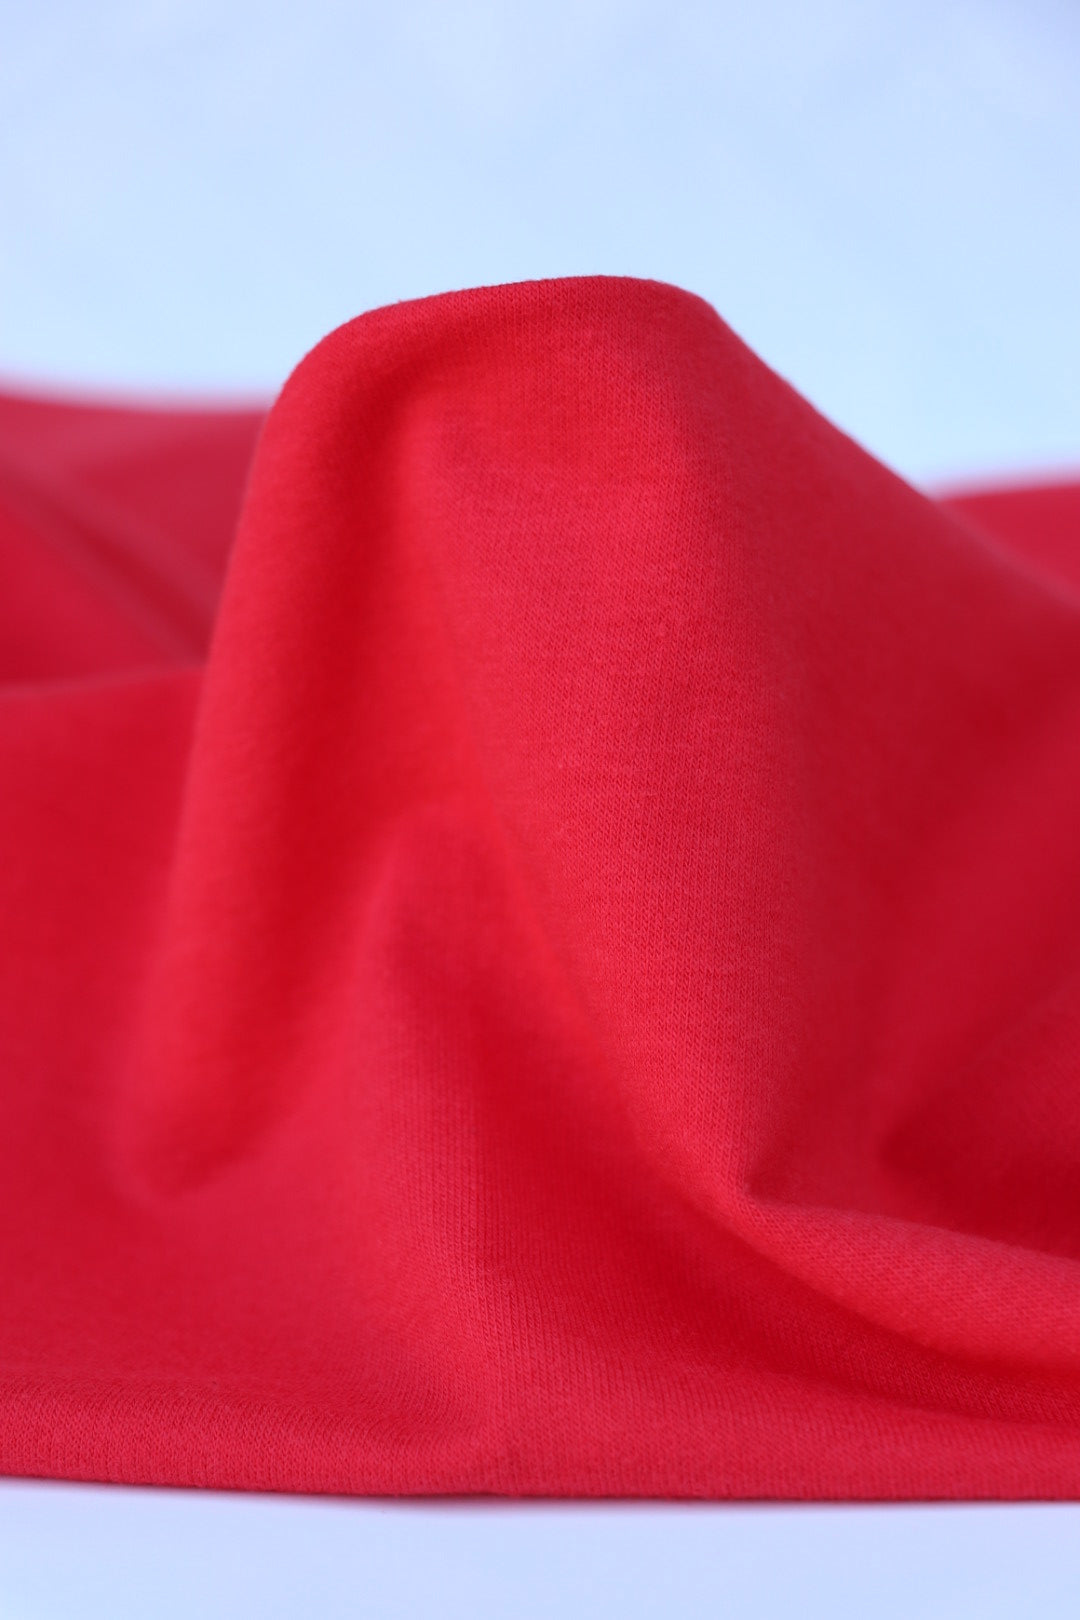 58 Red Poly Blend Stretch Terry Cloth Fabric by the Yard